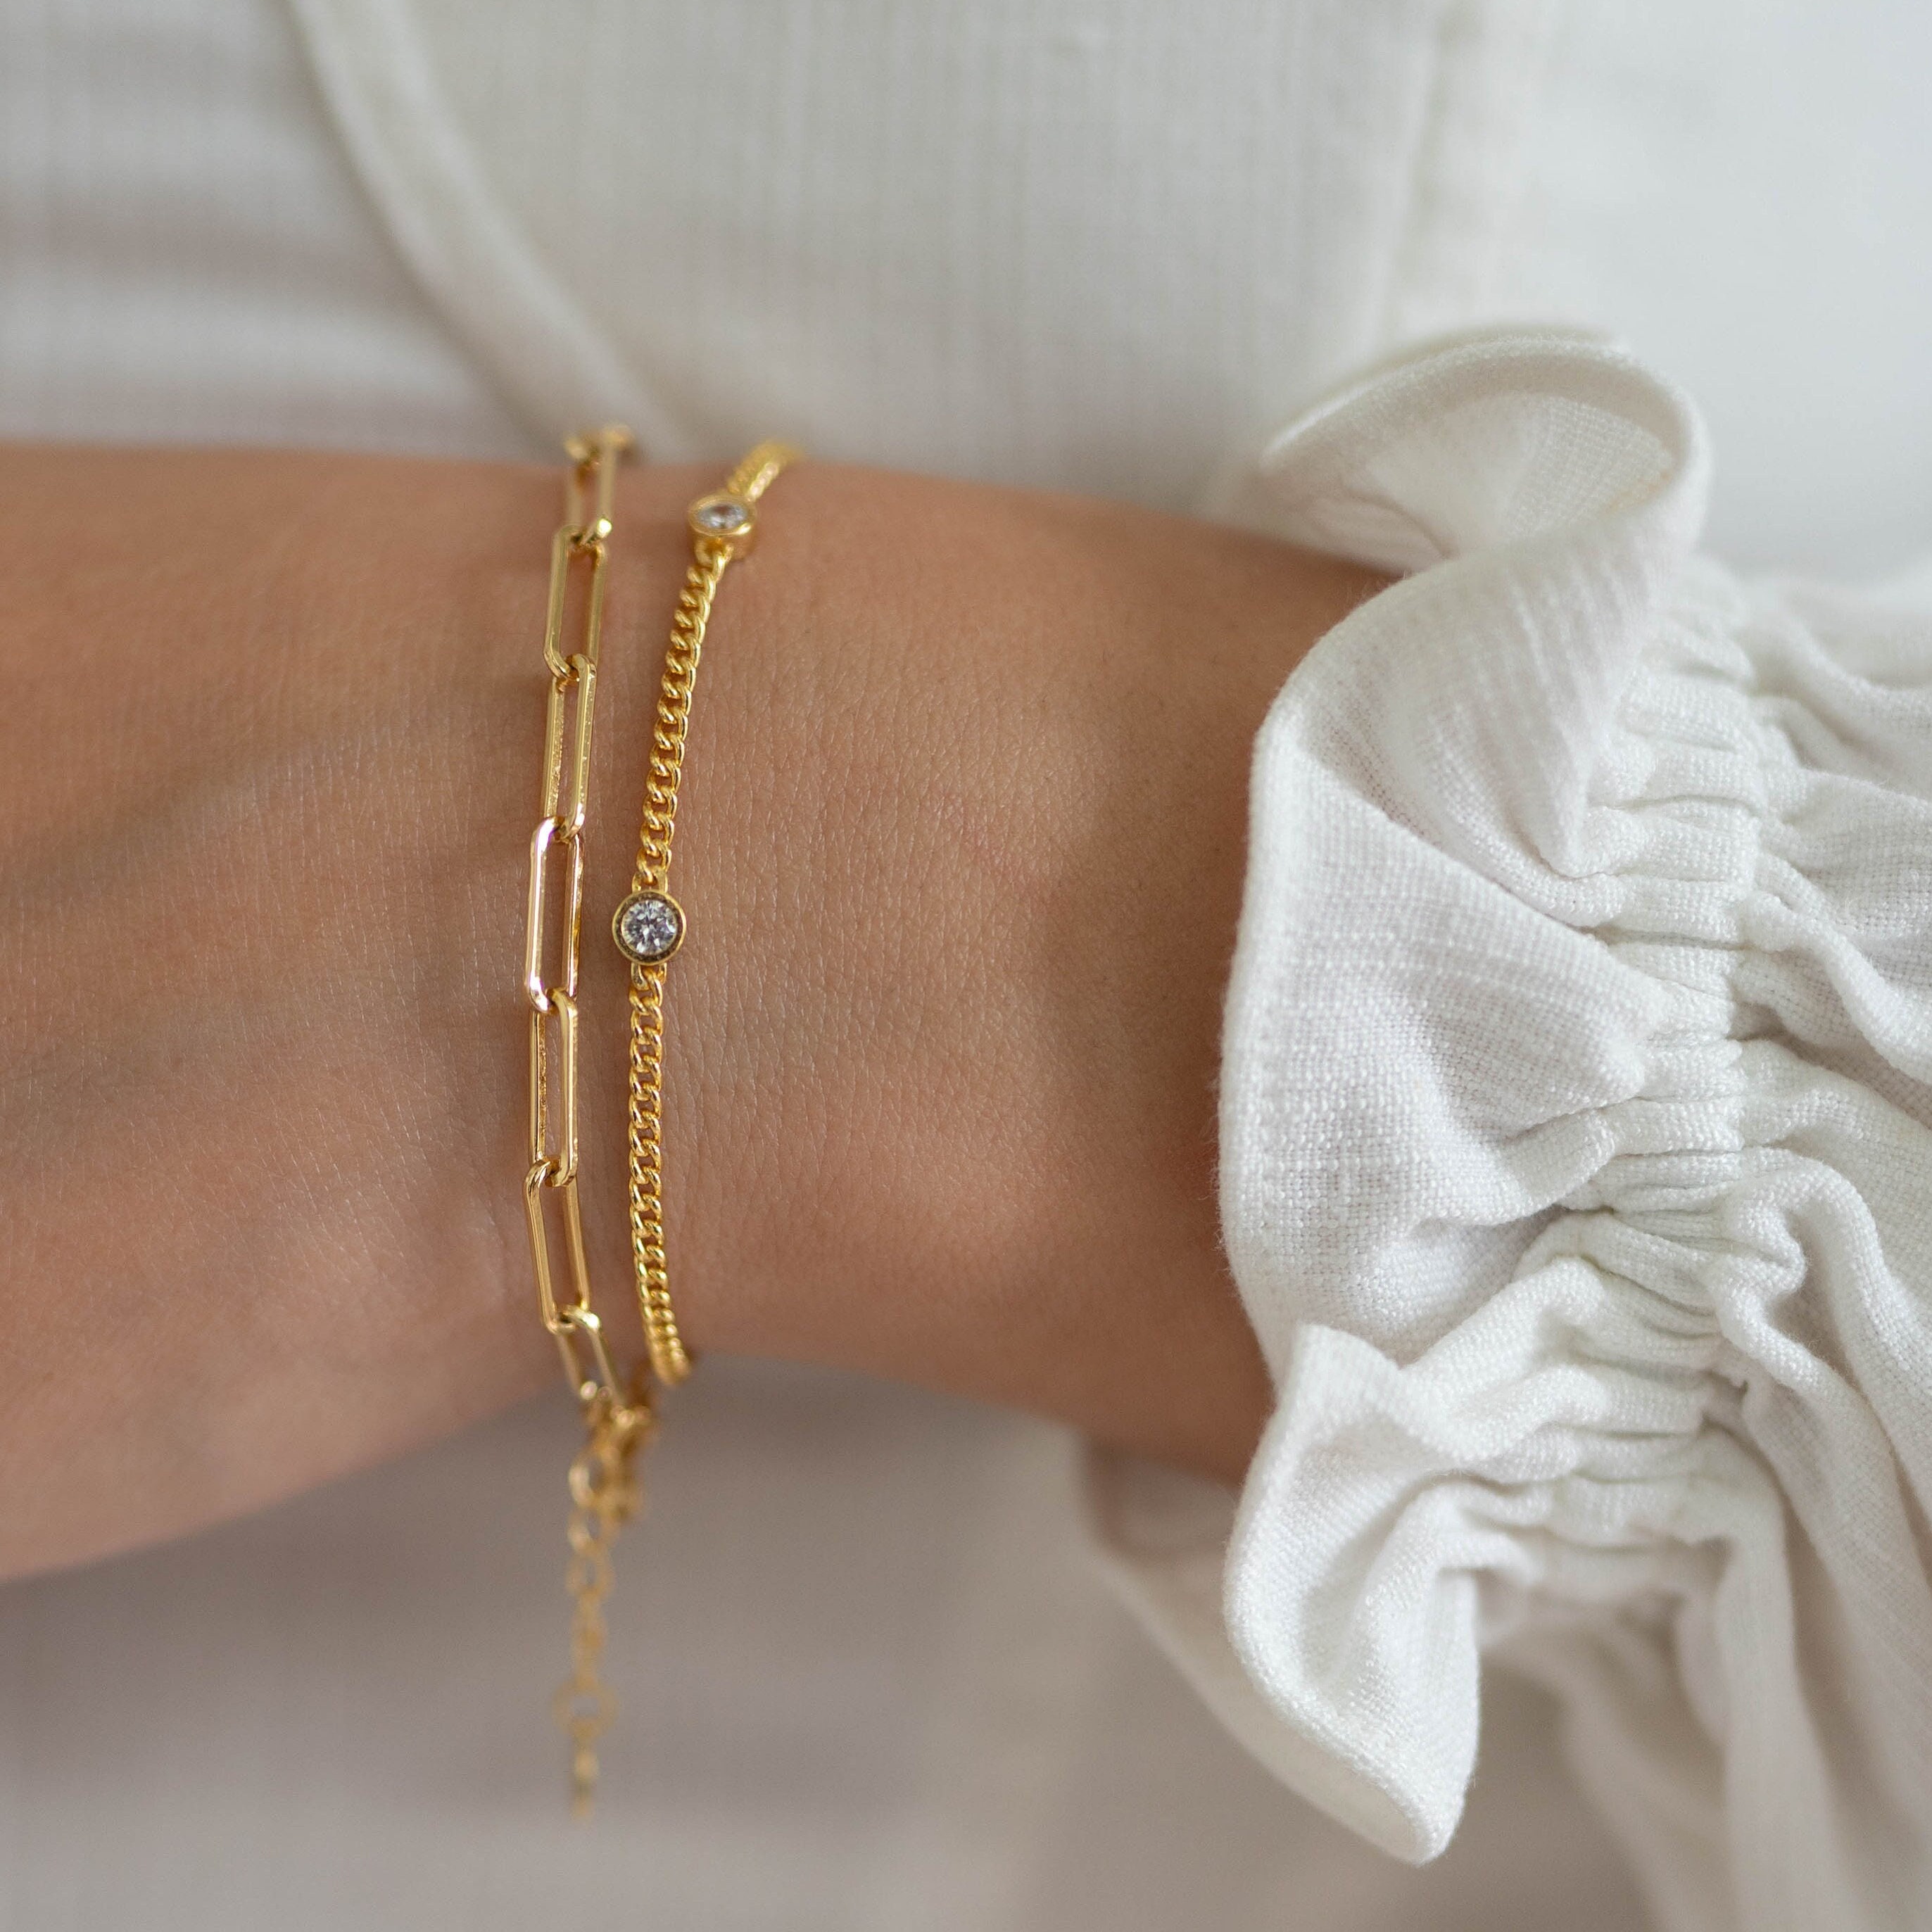  Gold Bracelets for Women Girls, Handmade non Tarnish Adjustable  Stackable Chain Bracelet Set, 14K Gold Plated Trendy Jewelry Layered Dainty  Link Bracelets : Clothing, Shoes & Jewelry